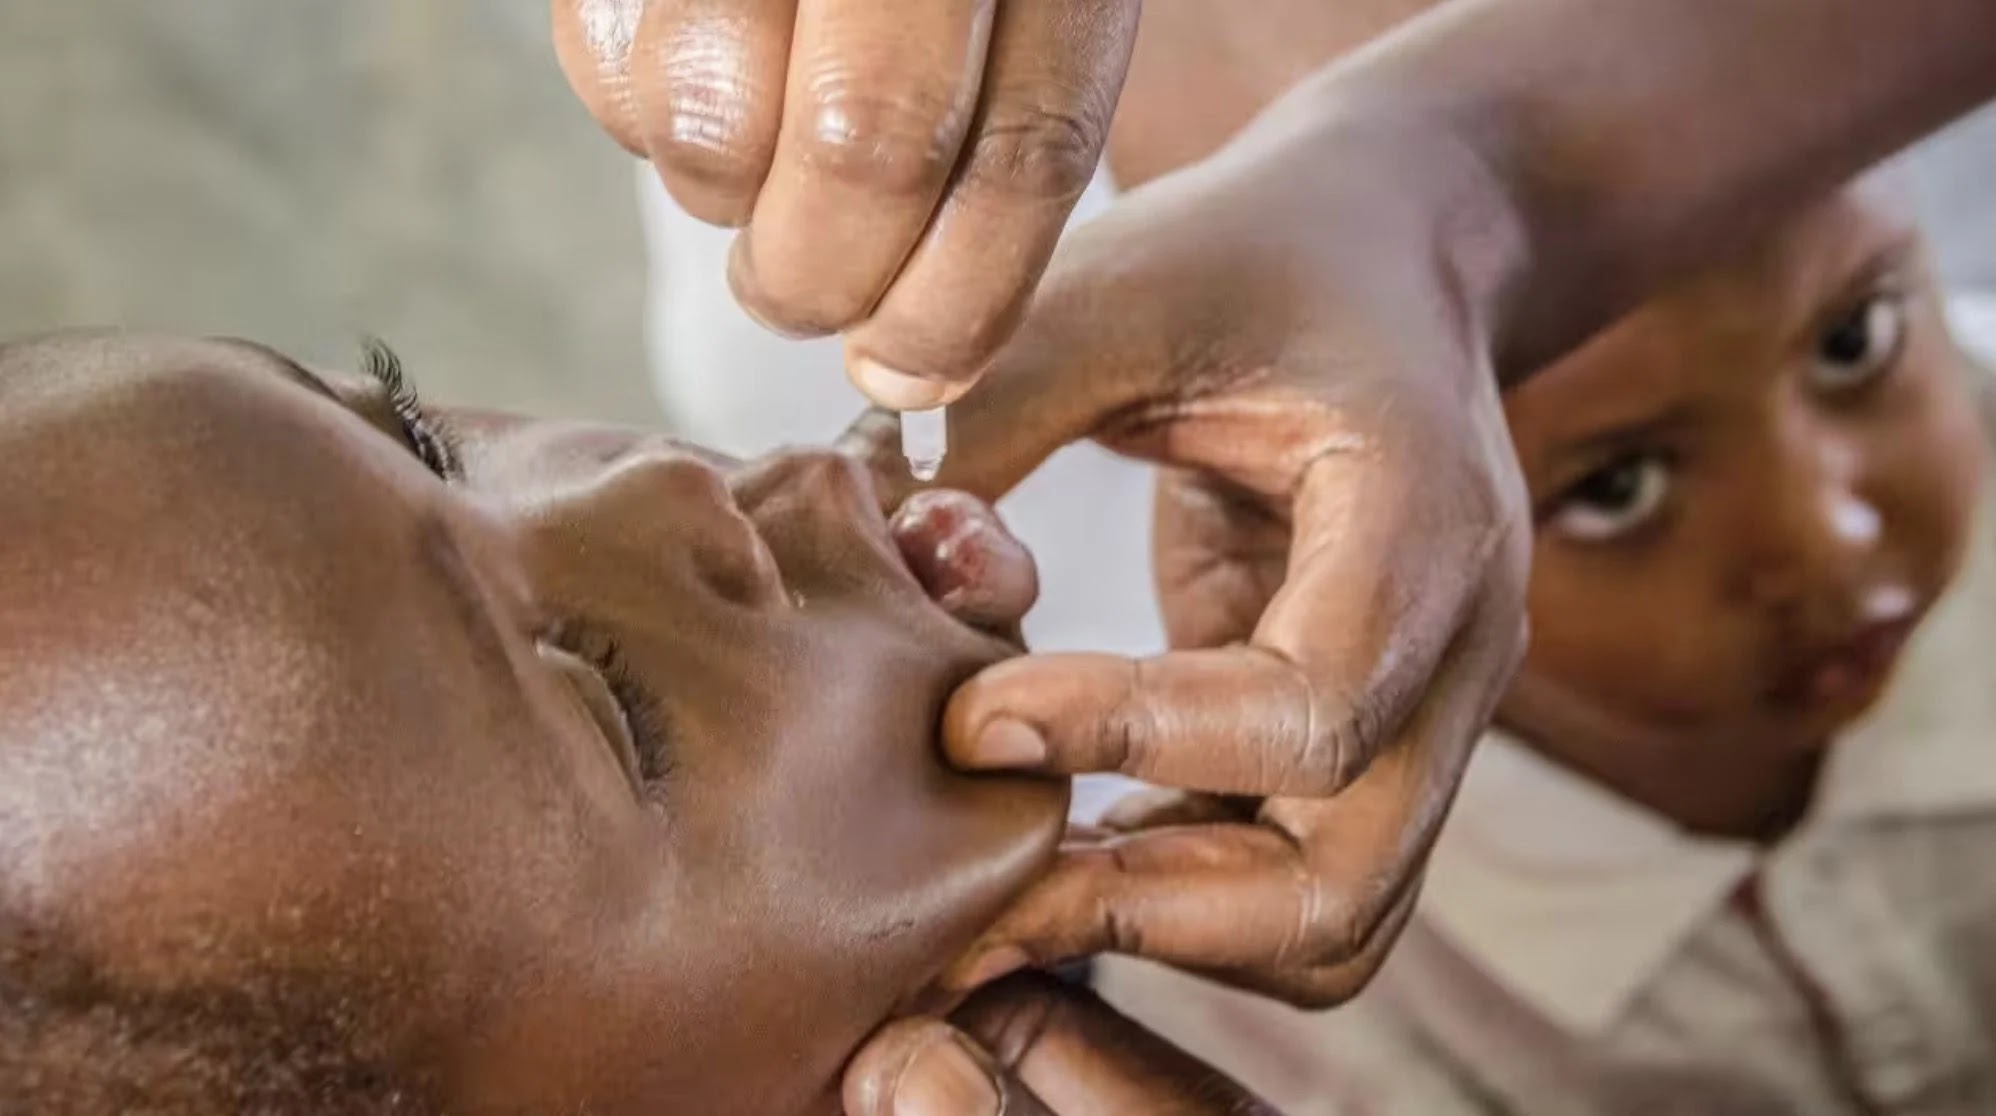 African Country Burundi Detects Polio Outbreak Linked to Polio Oral Vaccine – Vaccine-Induced Polio is Now More Prevalent than the Wild Type